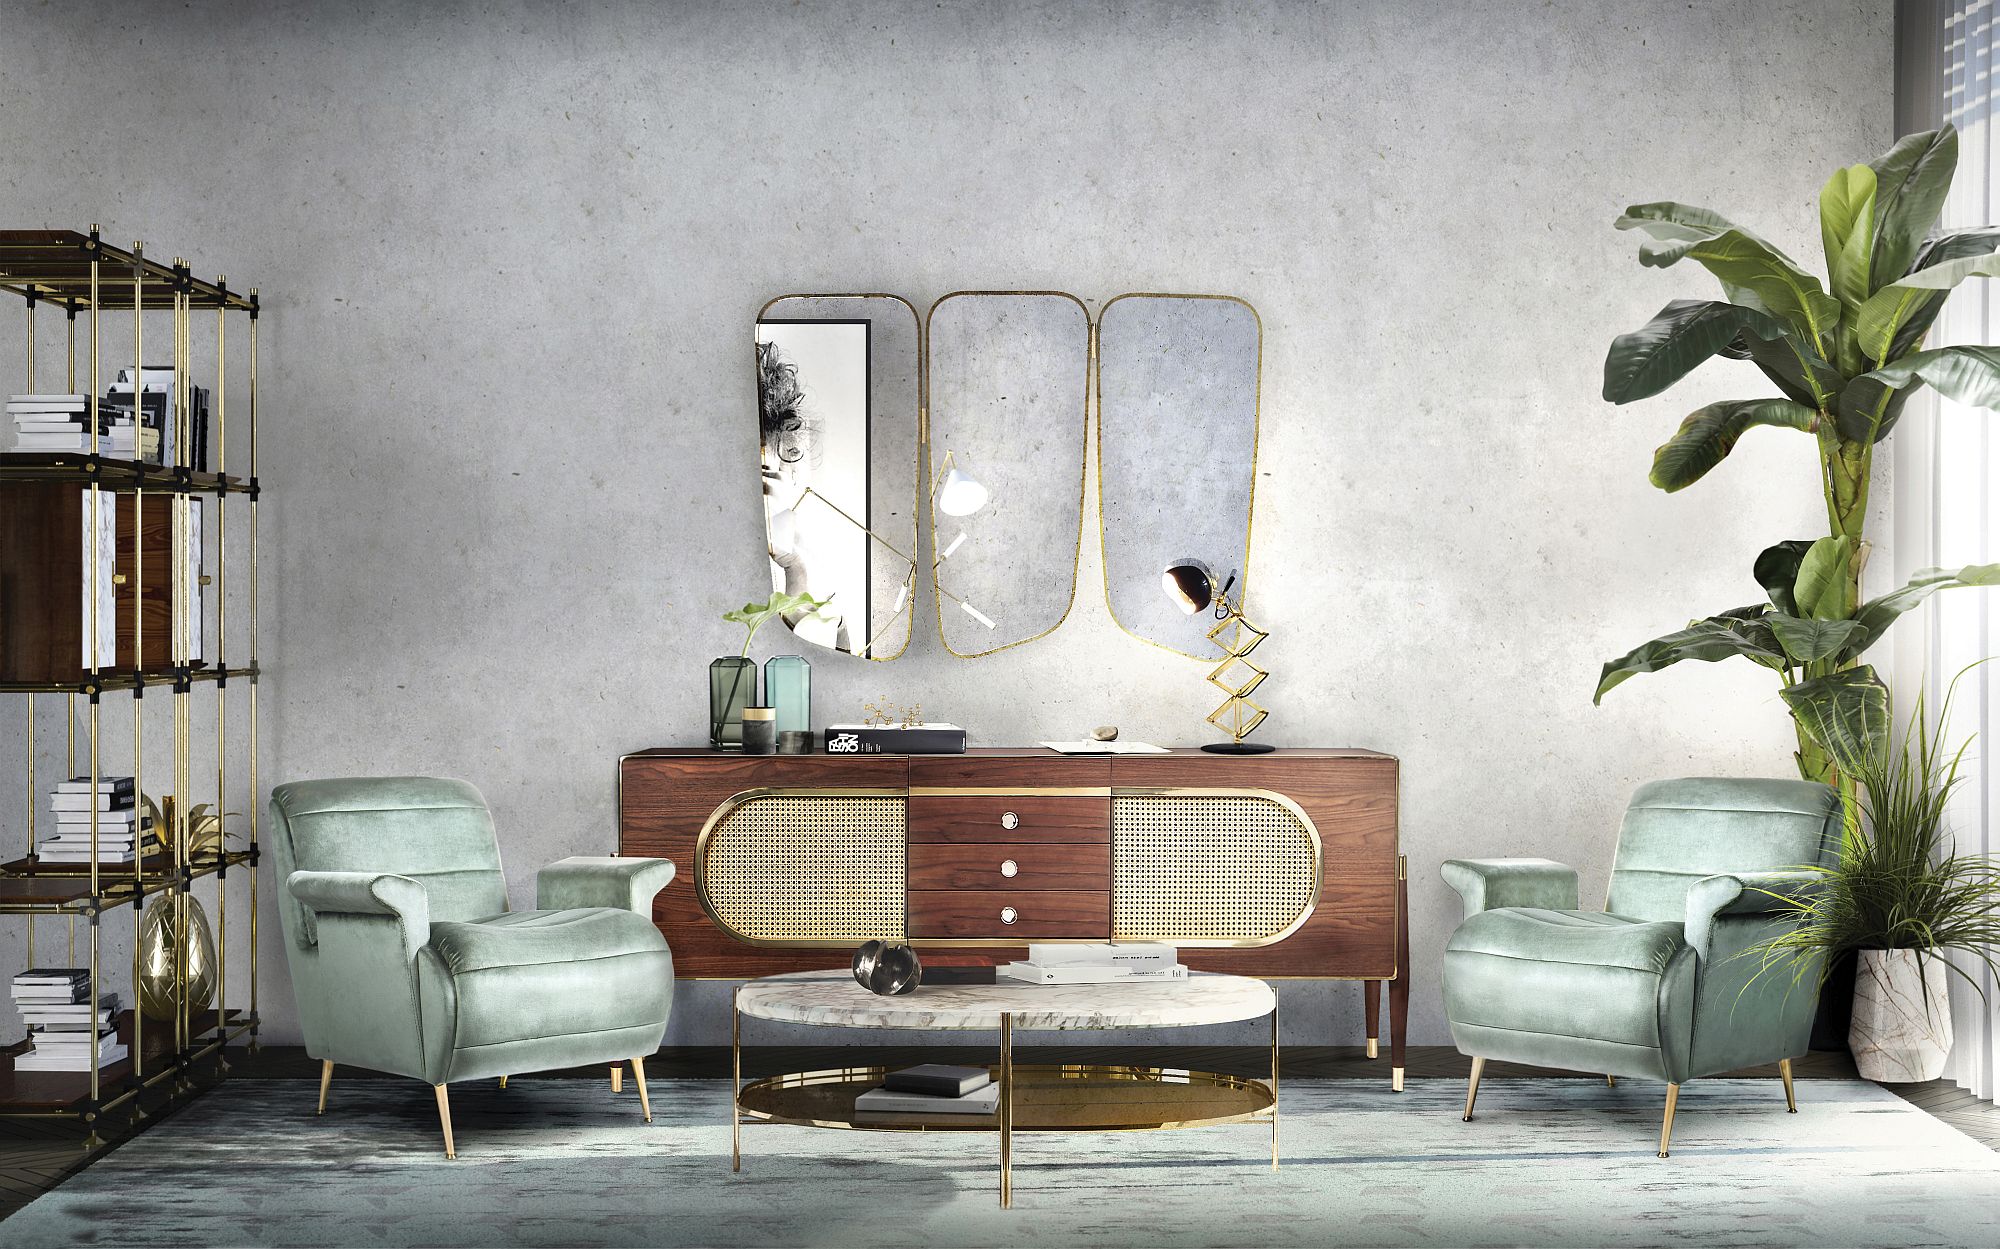 Midcentury modern living room decor from Essential Home